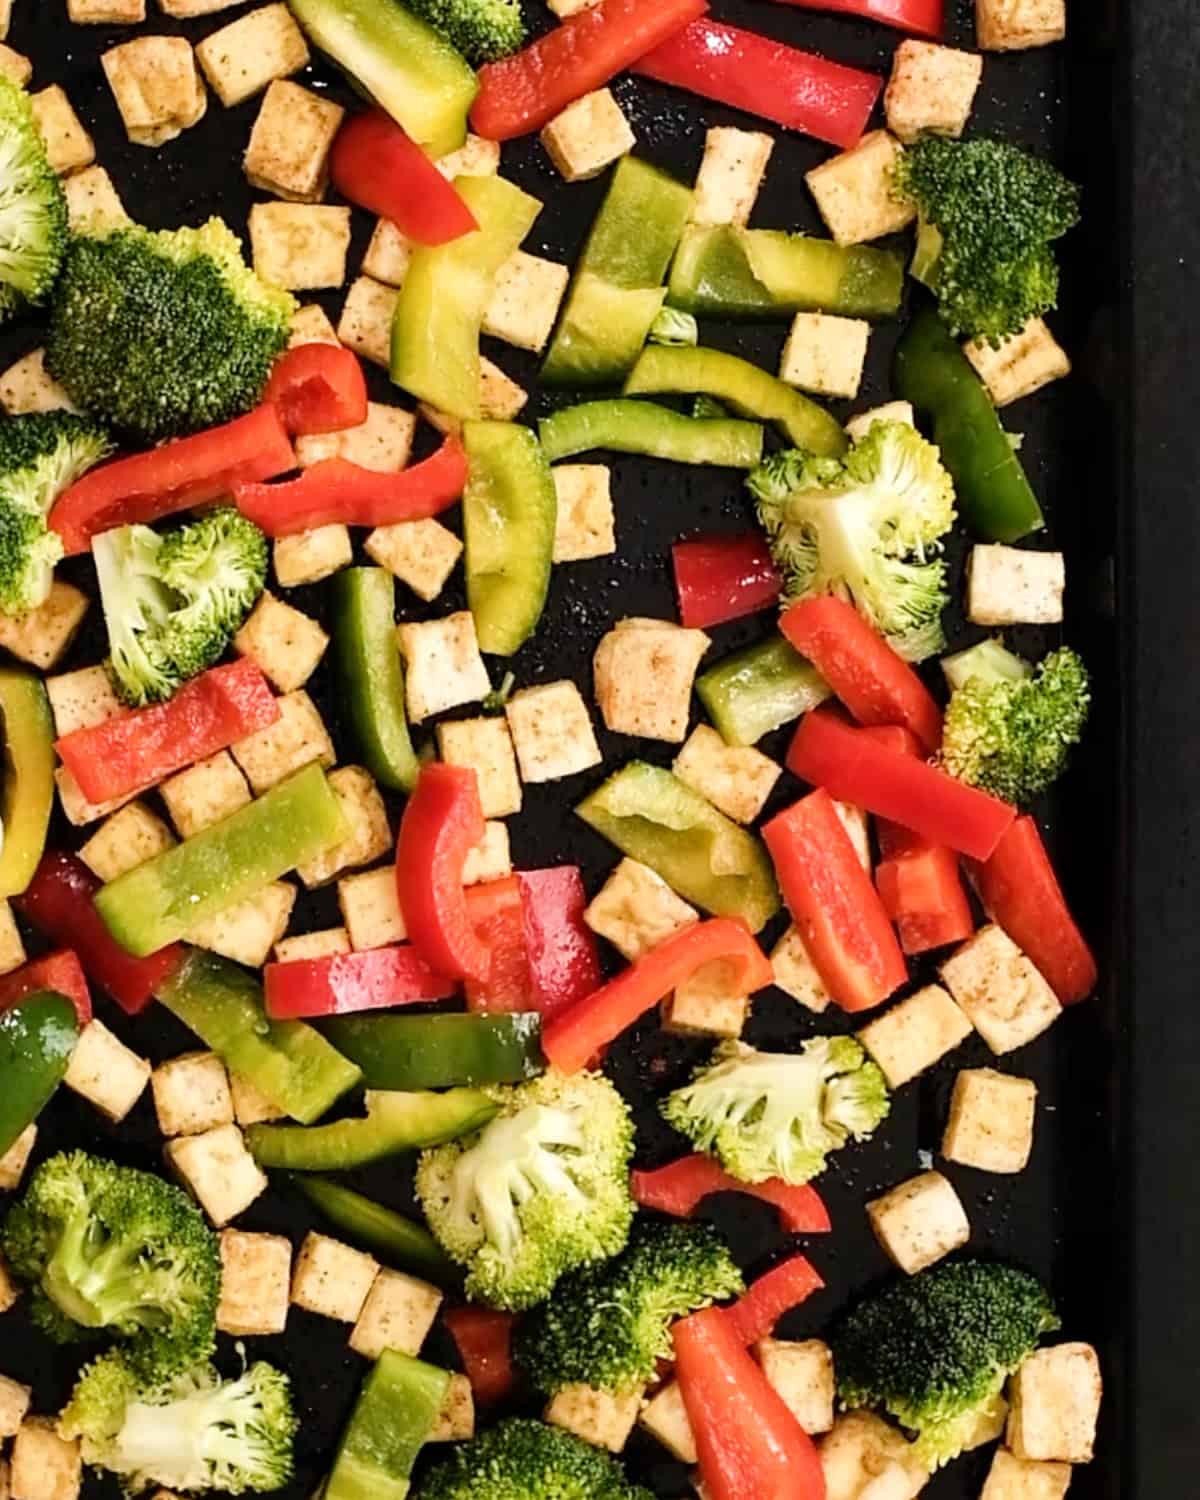 How to Make Baked Crispy Tofu adding vegetables to partially baked tofu